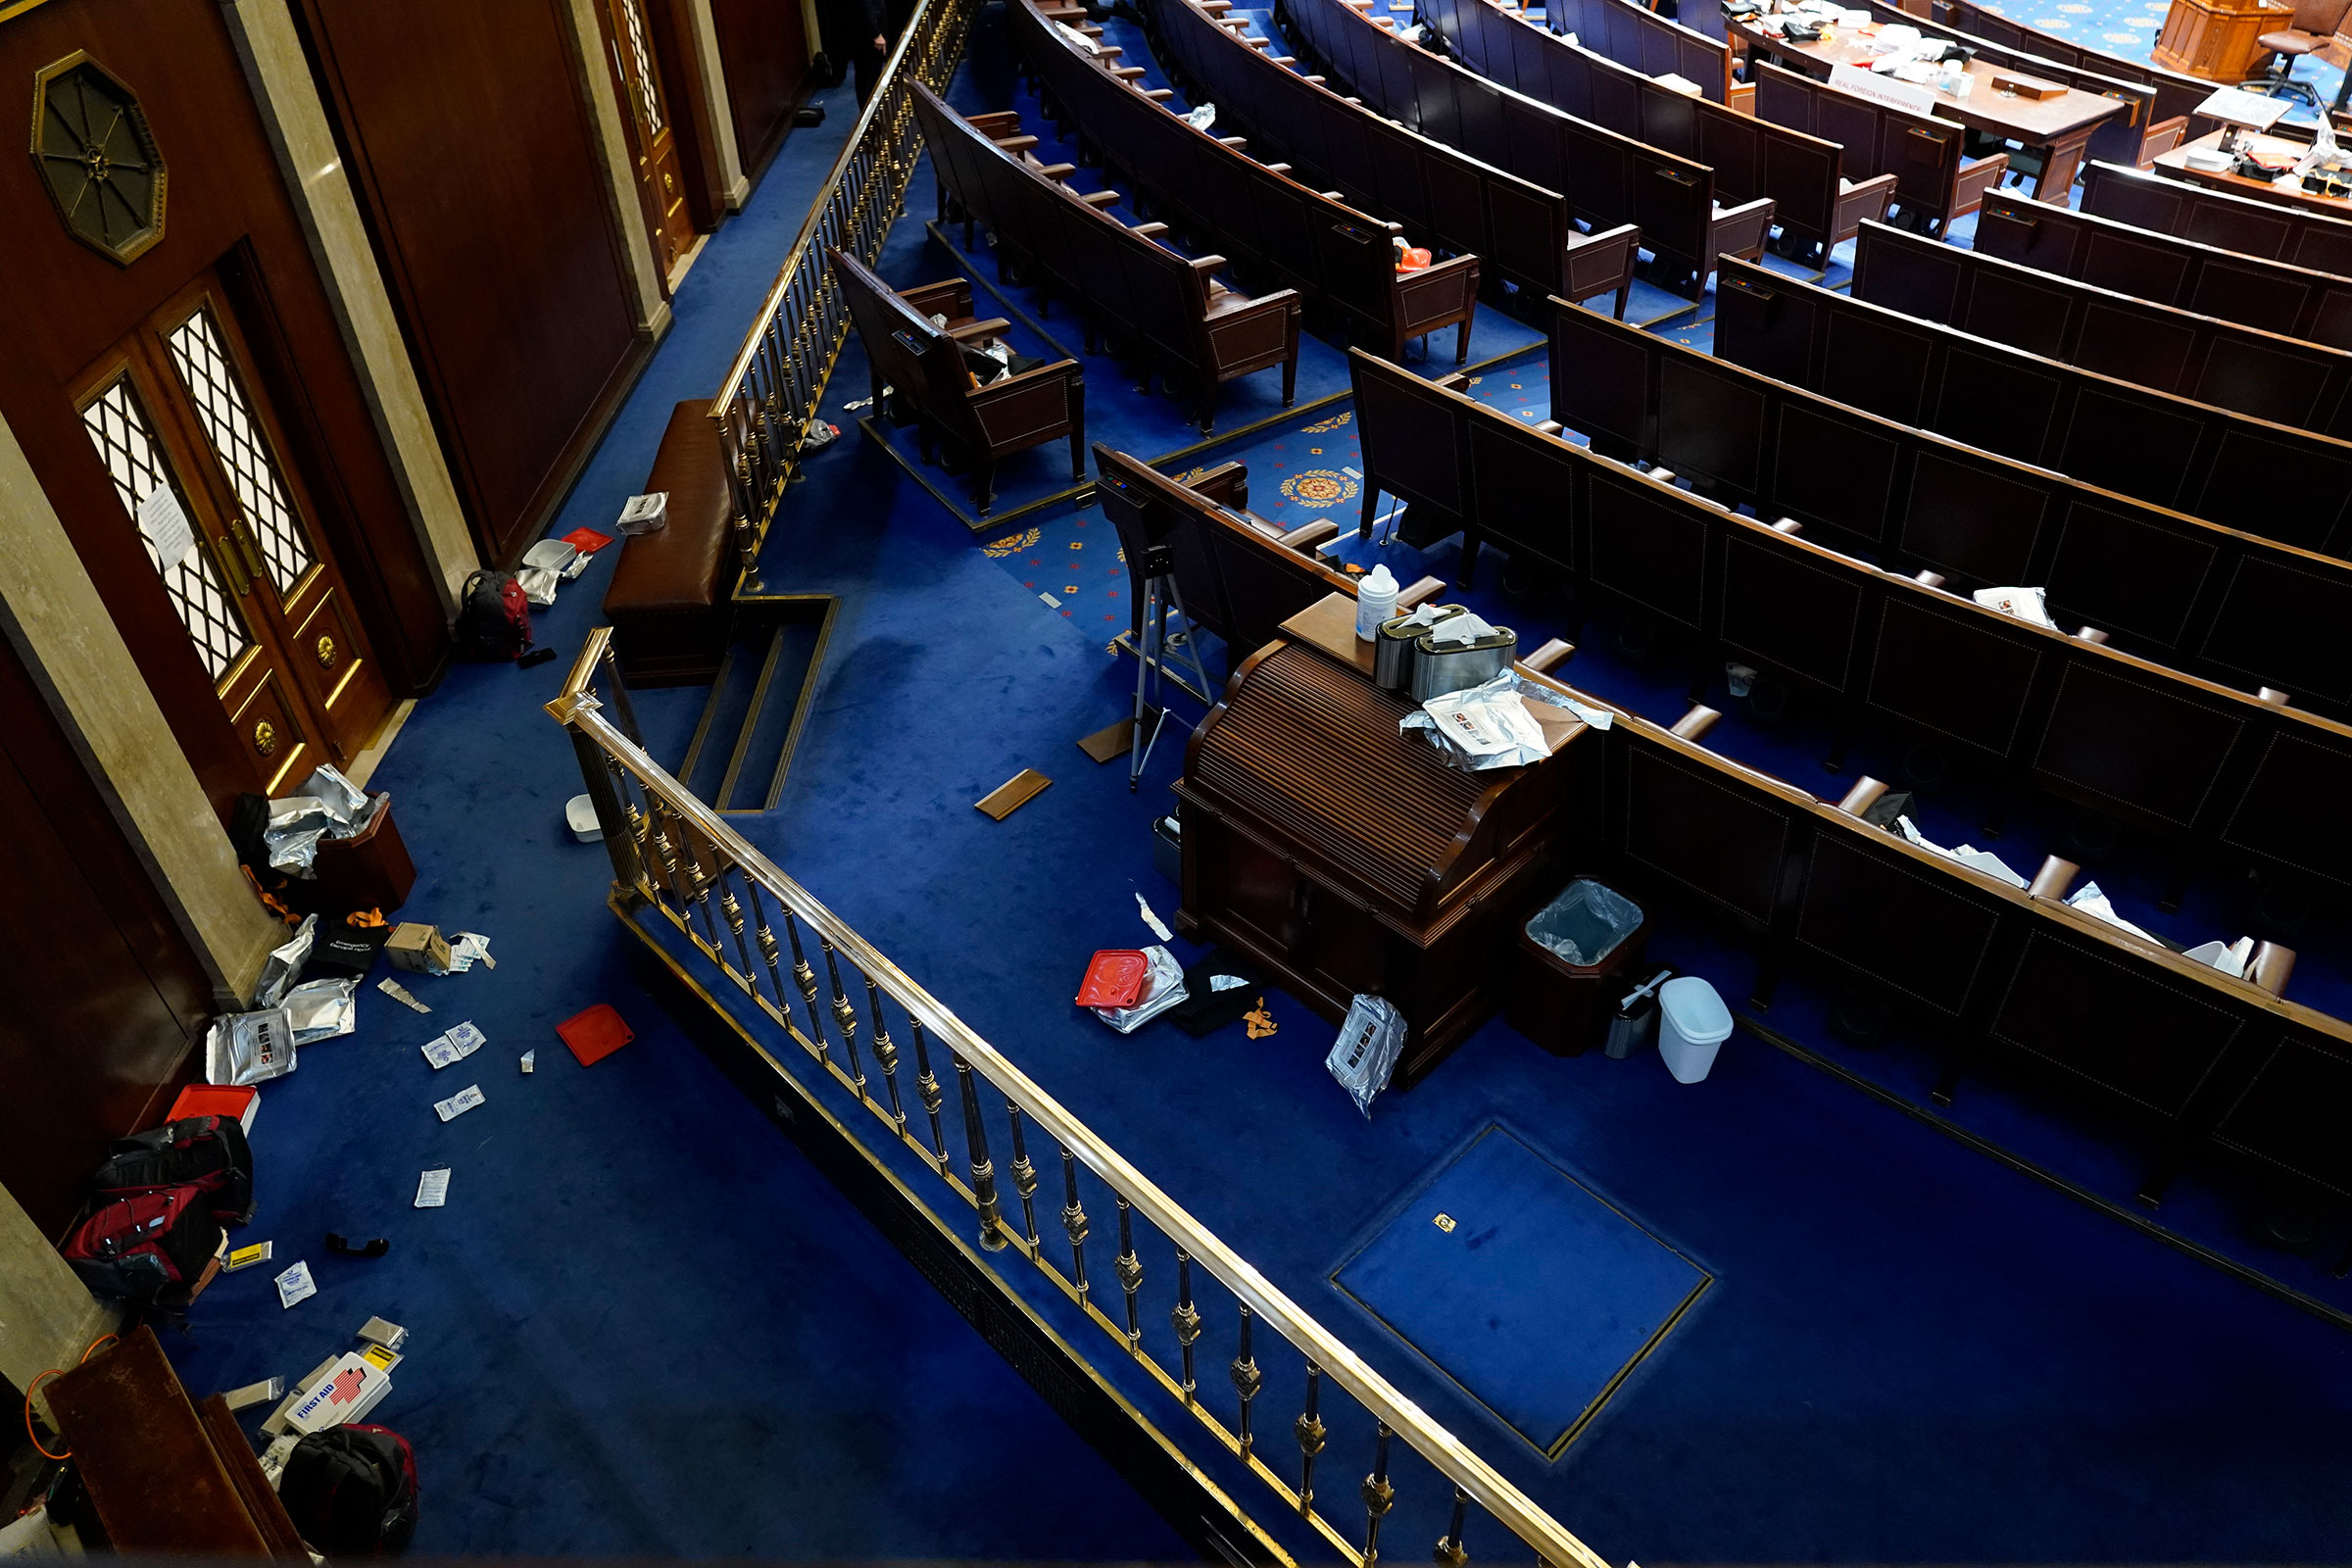 Papers and other materials litter the chamber after House were evacuated as protesters try to break into the House Chamber on Jan. 6, 2021.